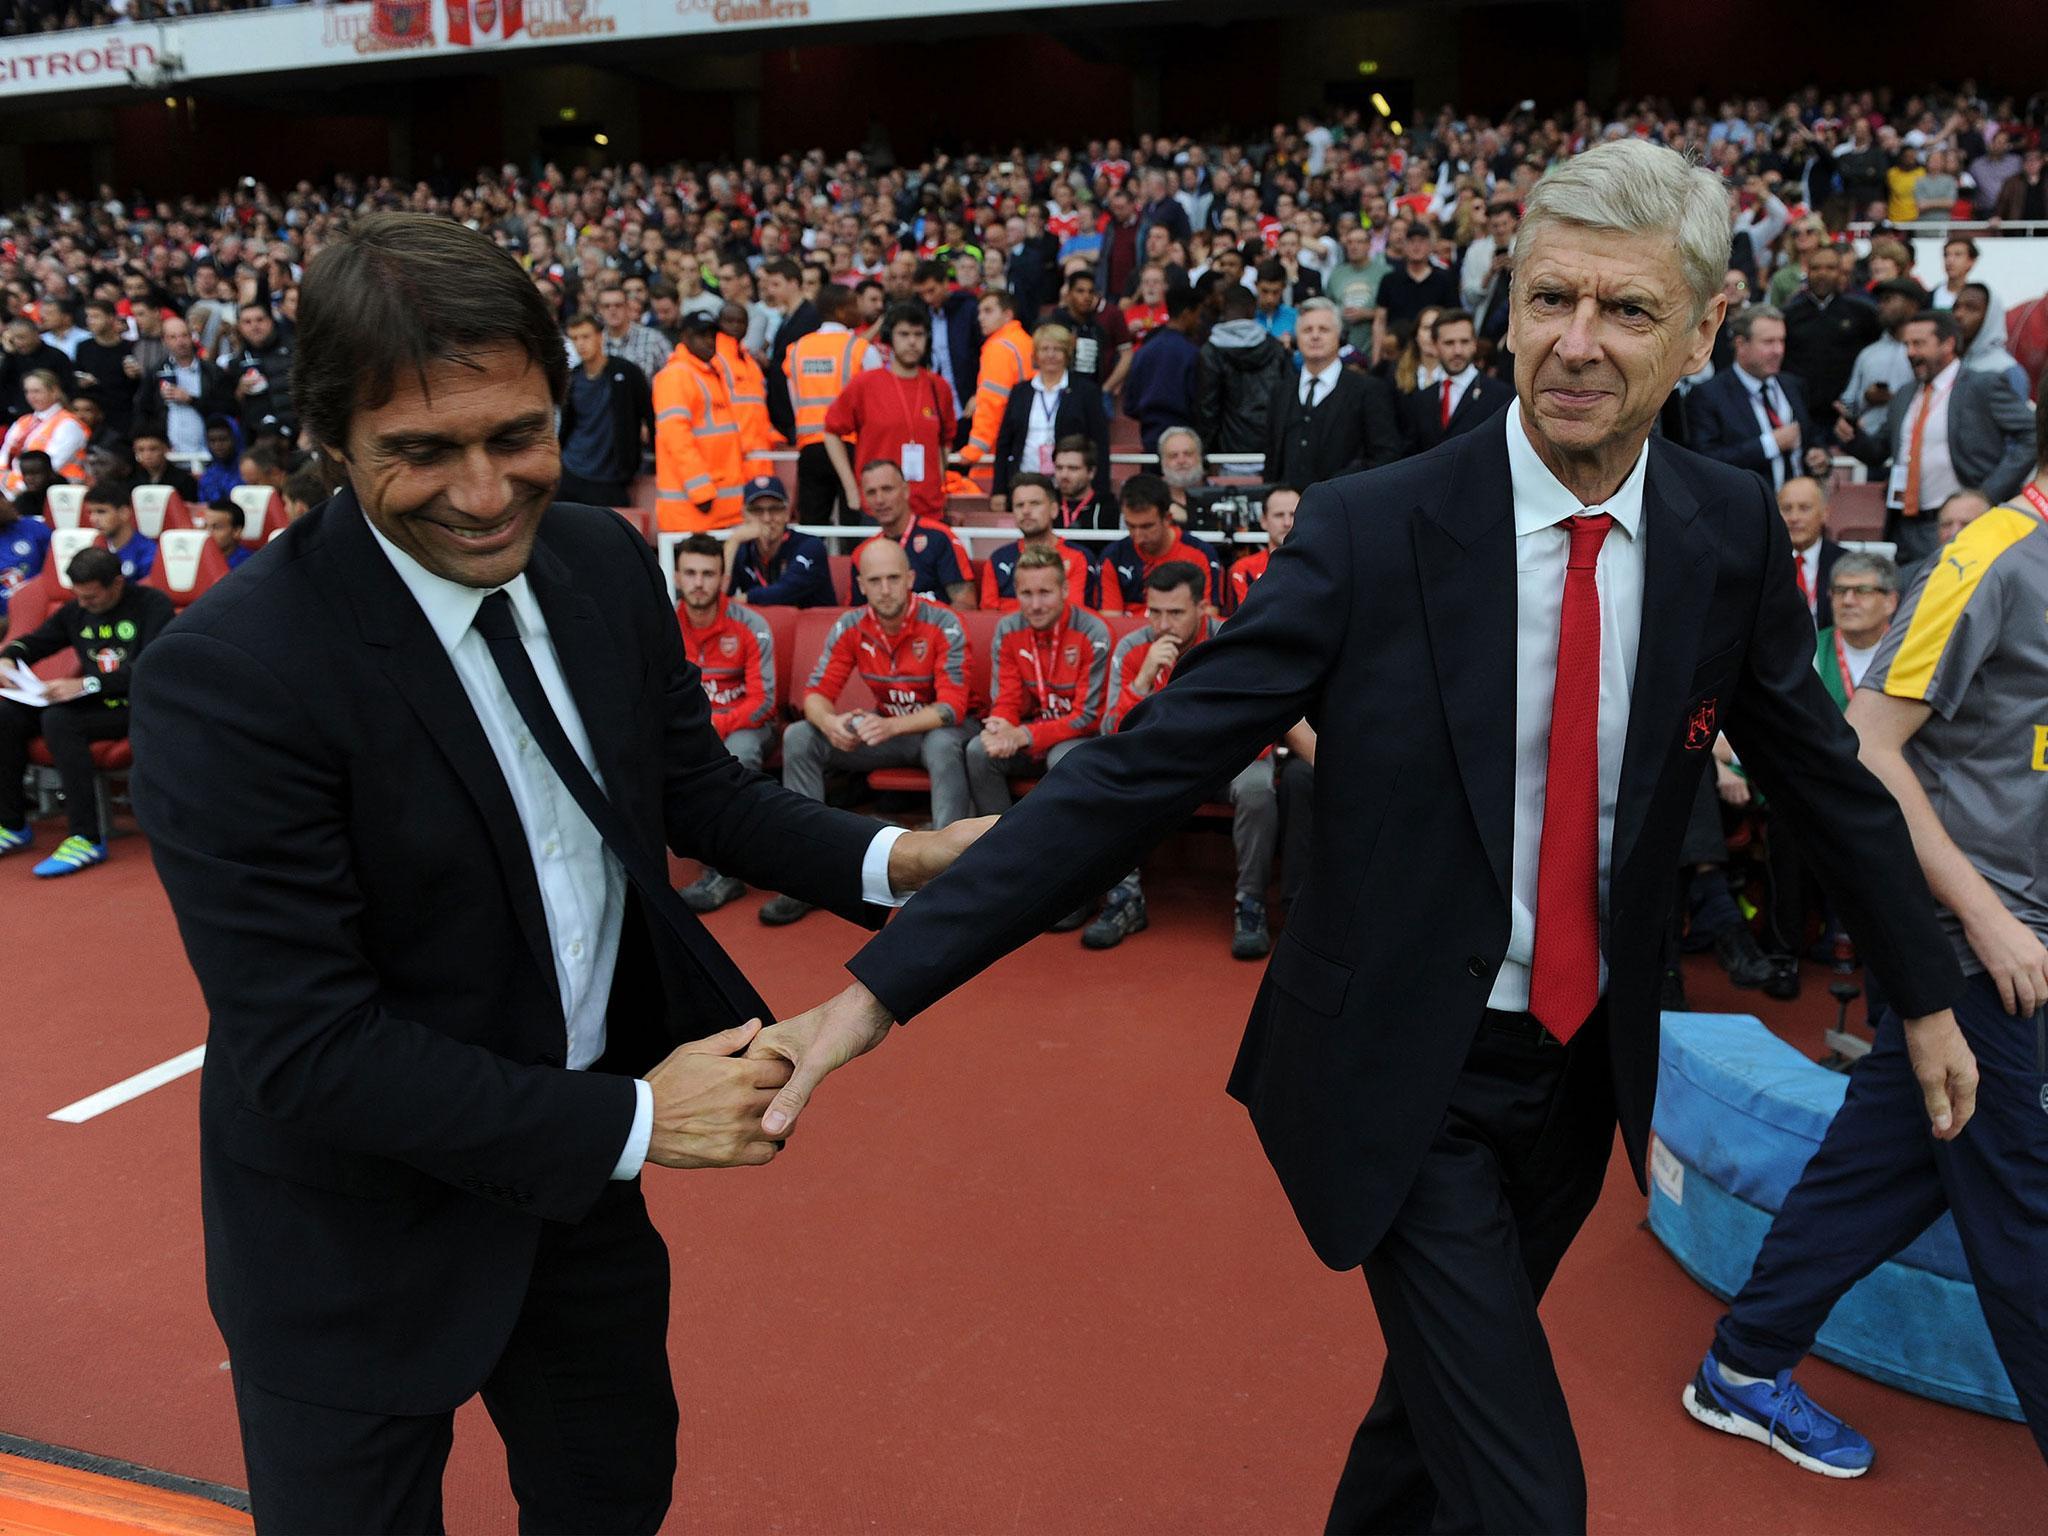 Antonio Conte doesn't think the FA Cup final will be Arsene Wenger's last game at Arsenal